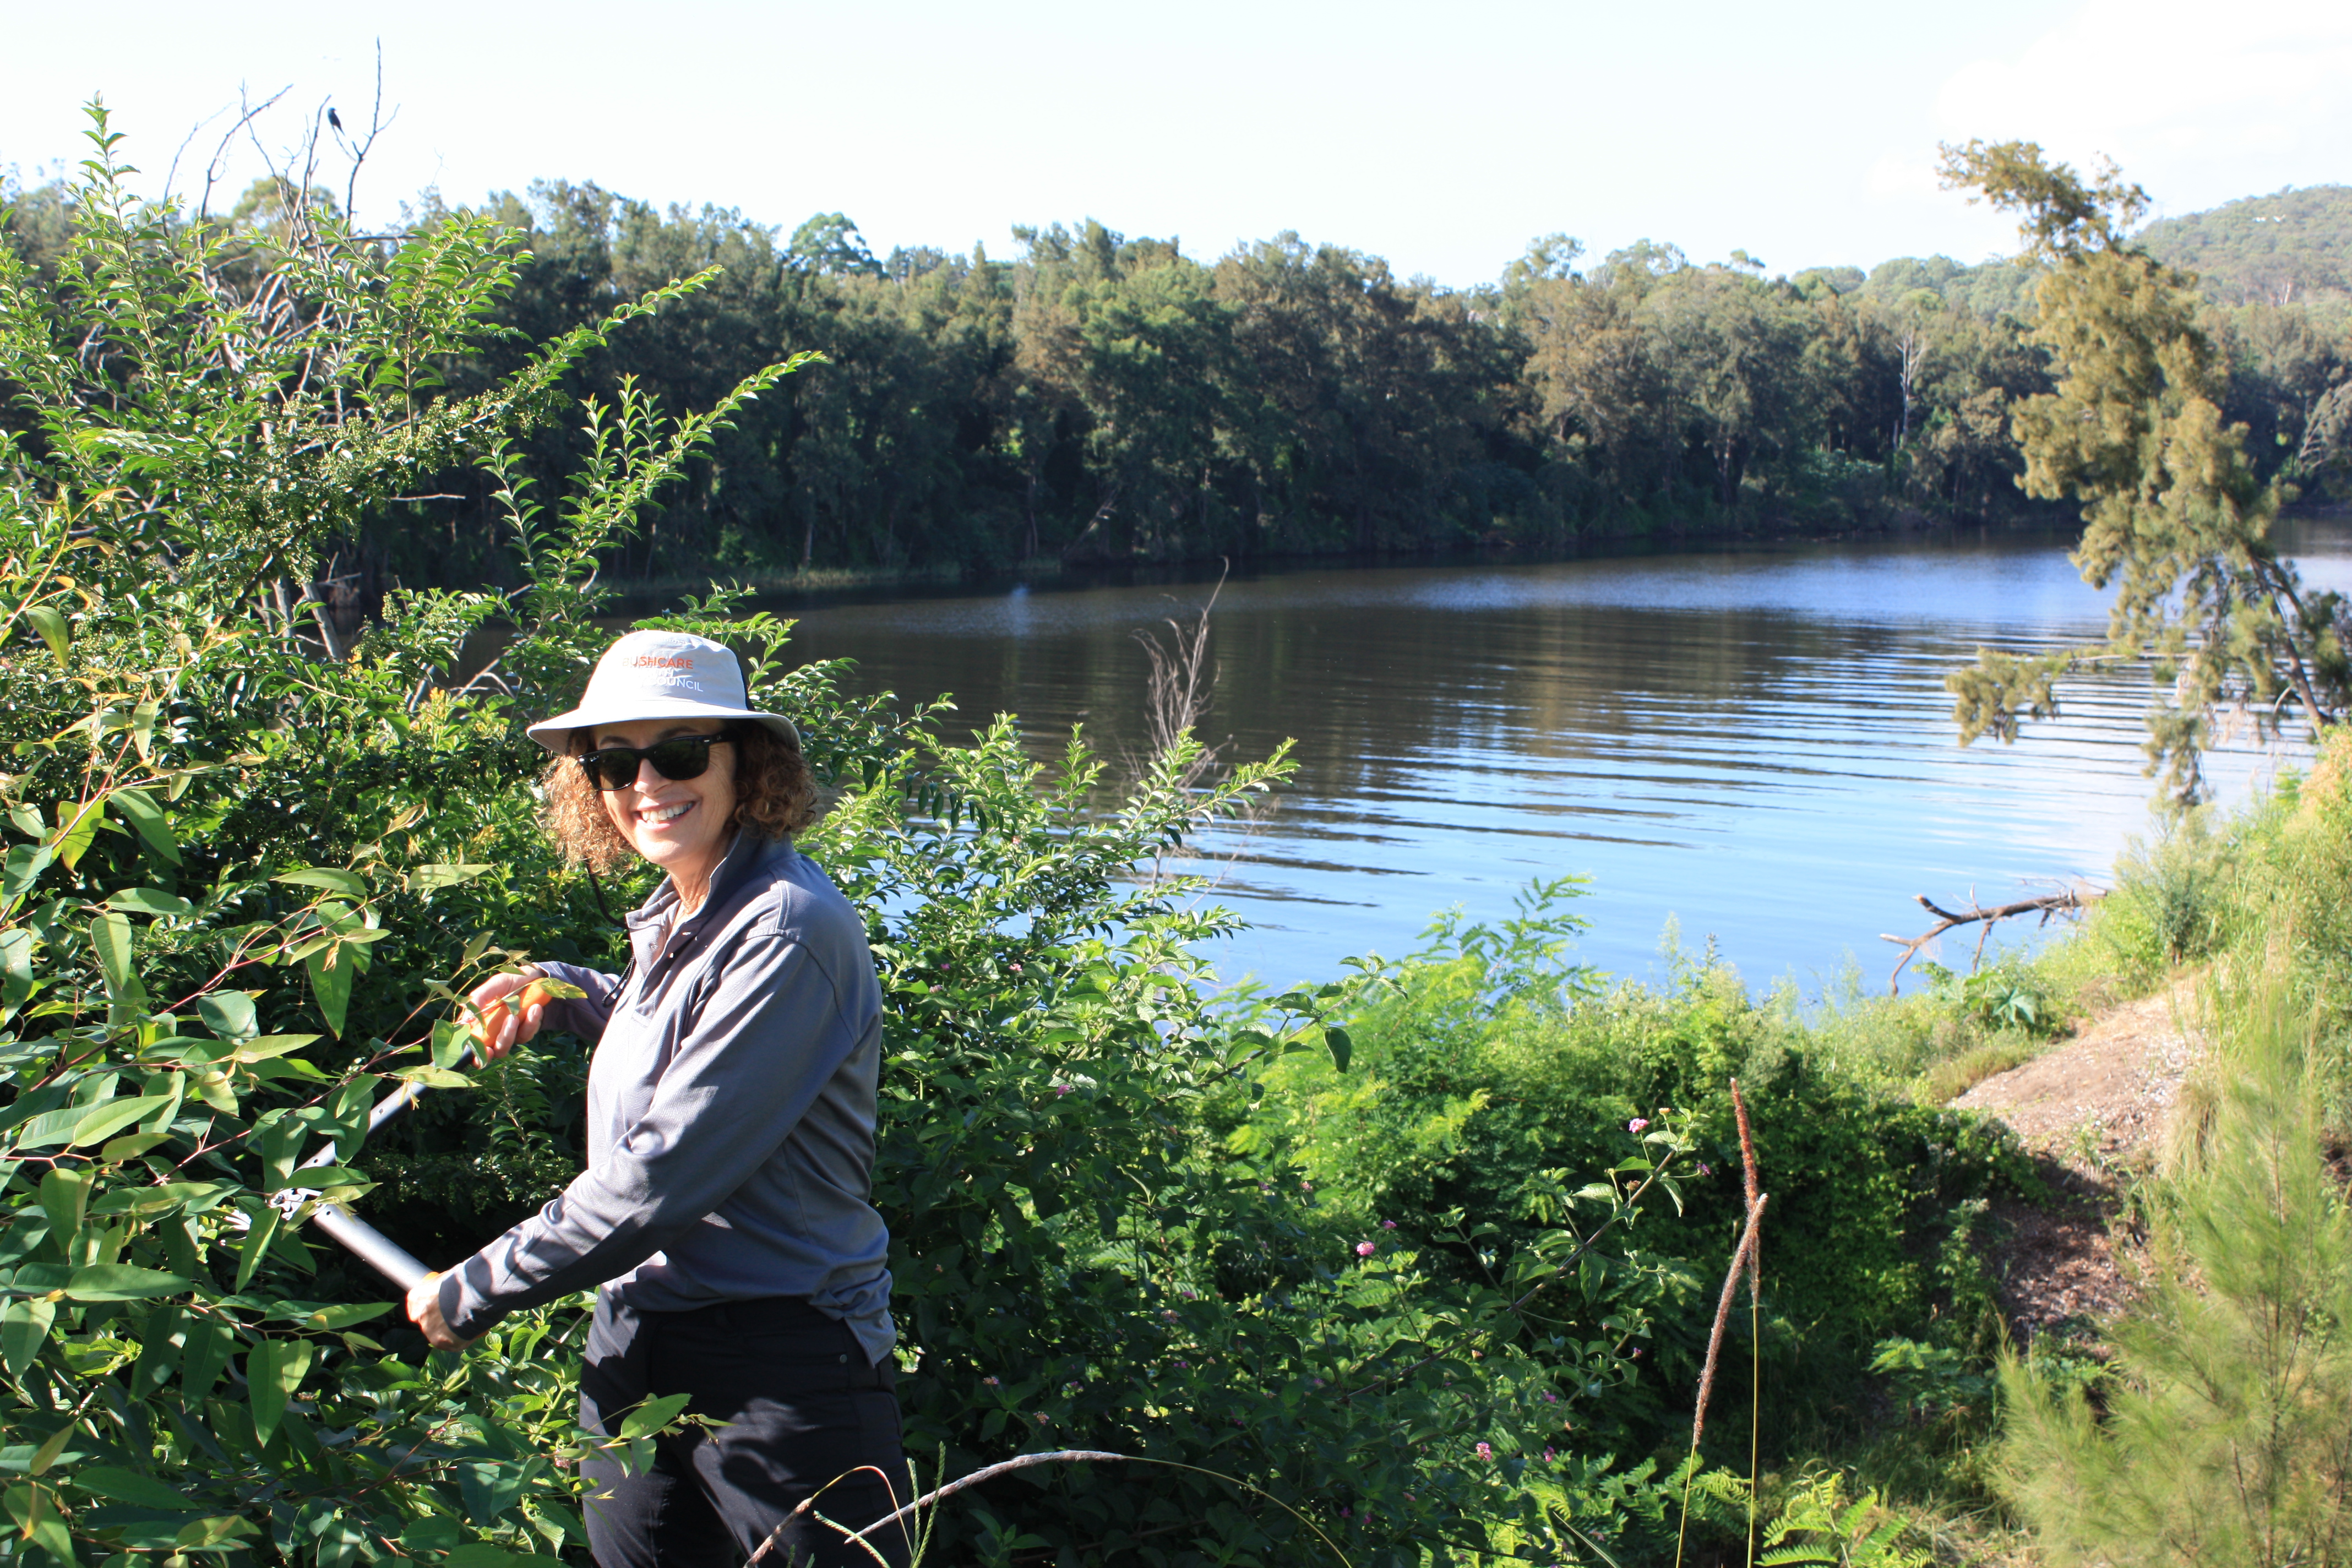 A volunteer smiling as they remove weeds from plants along the riverbank.